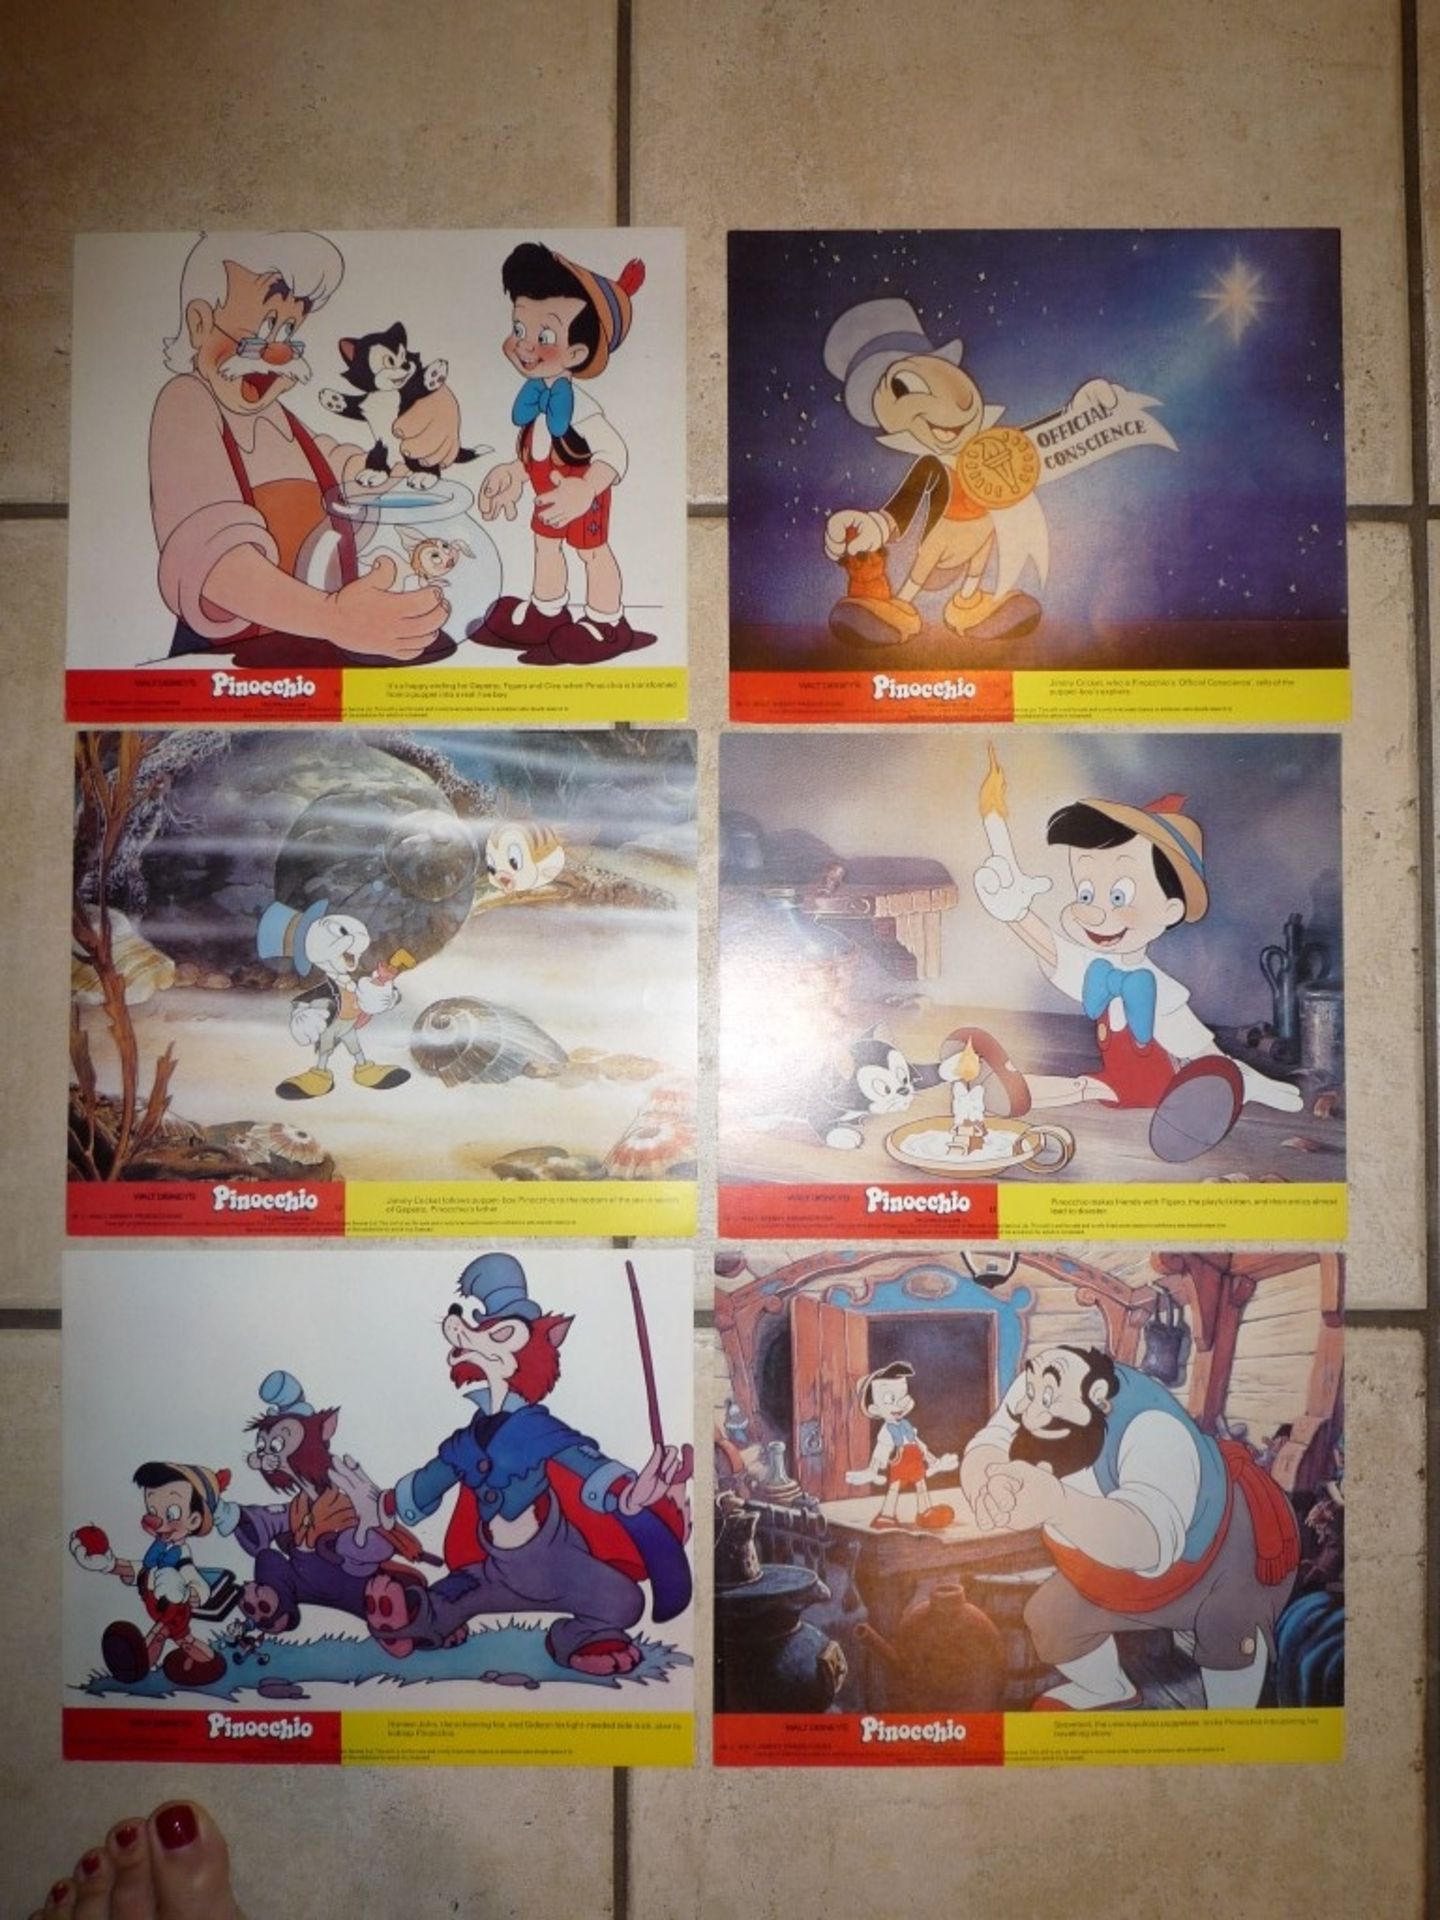 Pinnochio Re Release cards - Image 2 of 2